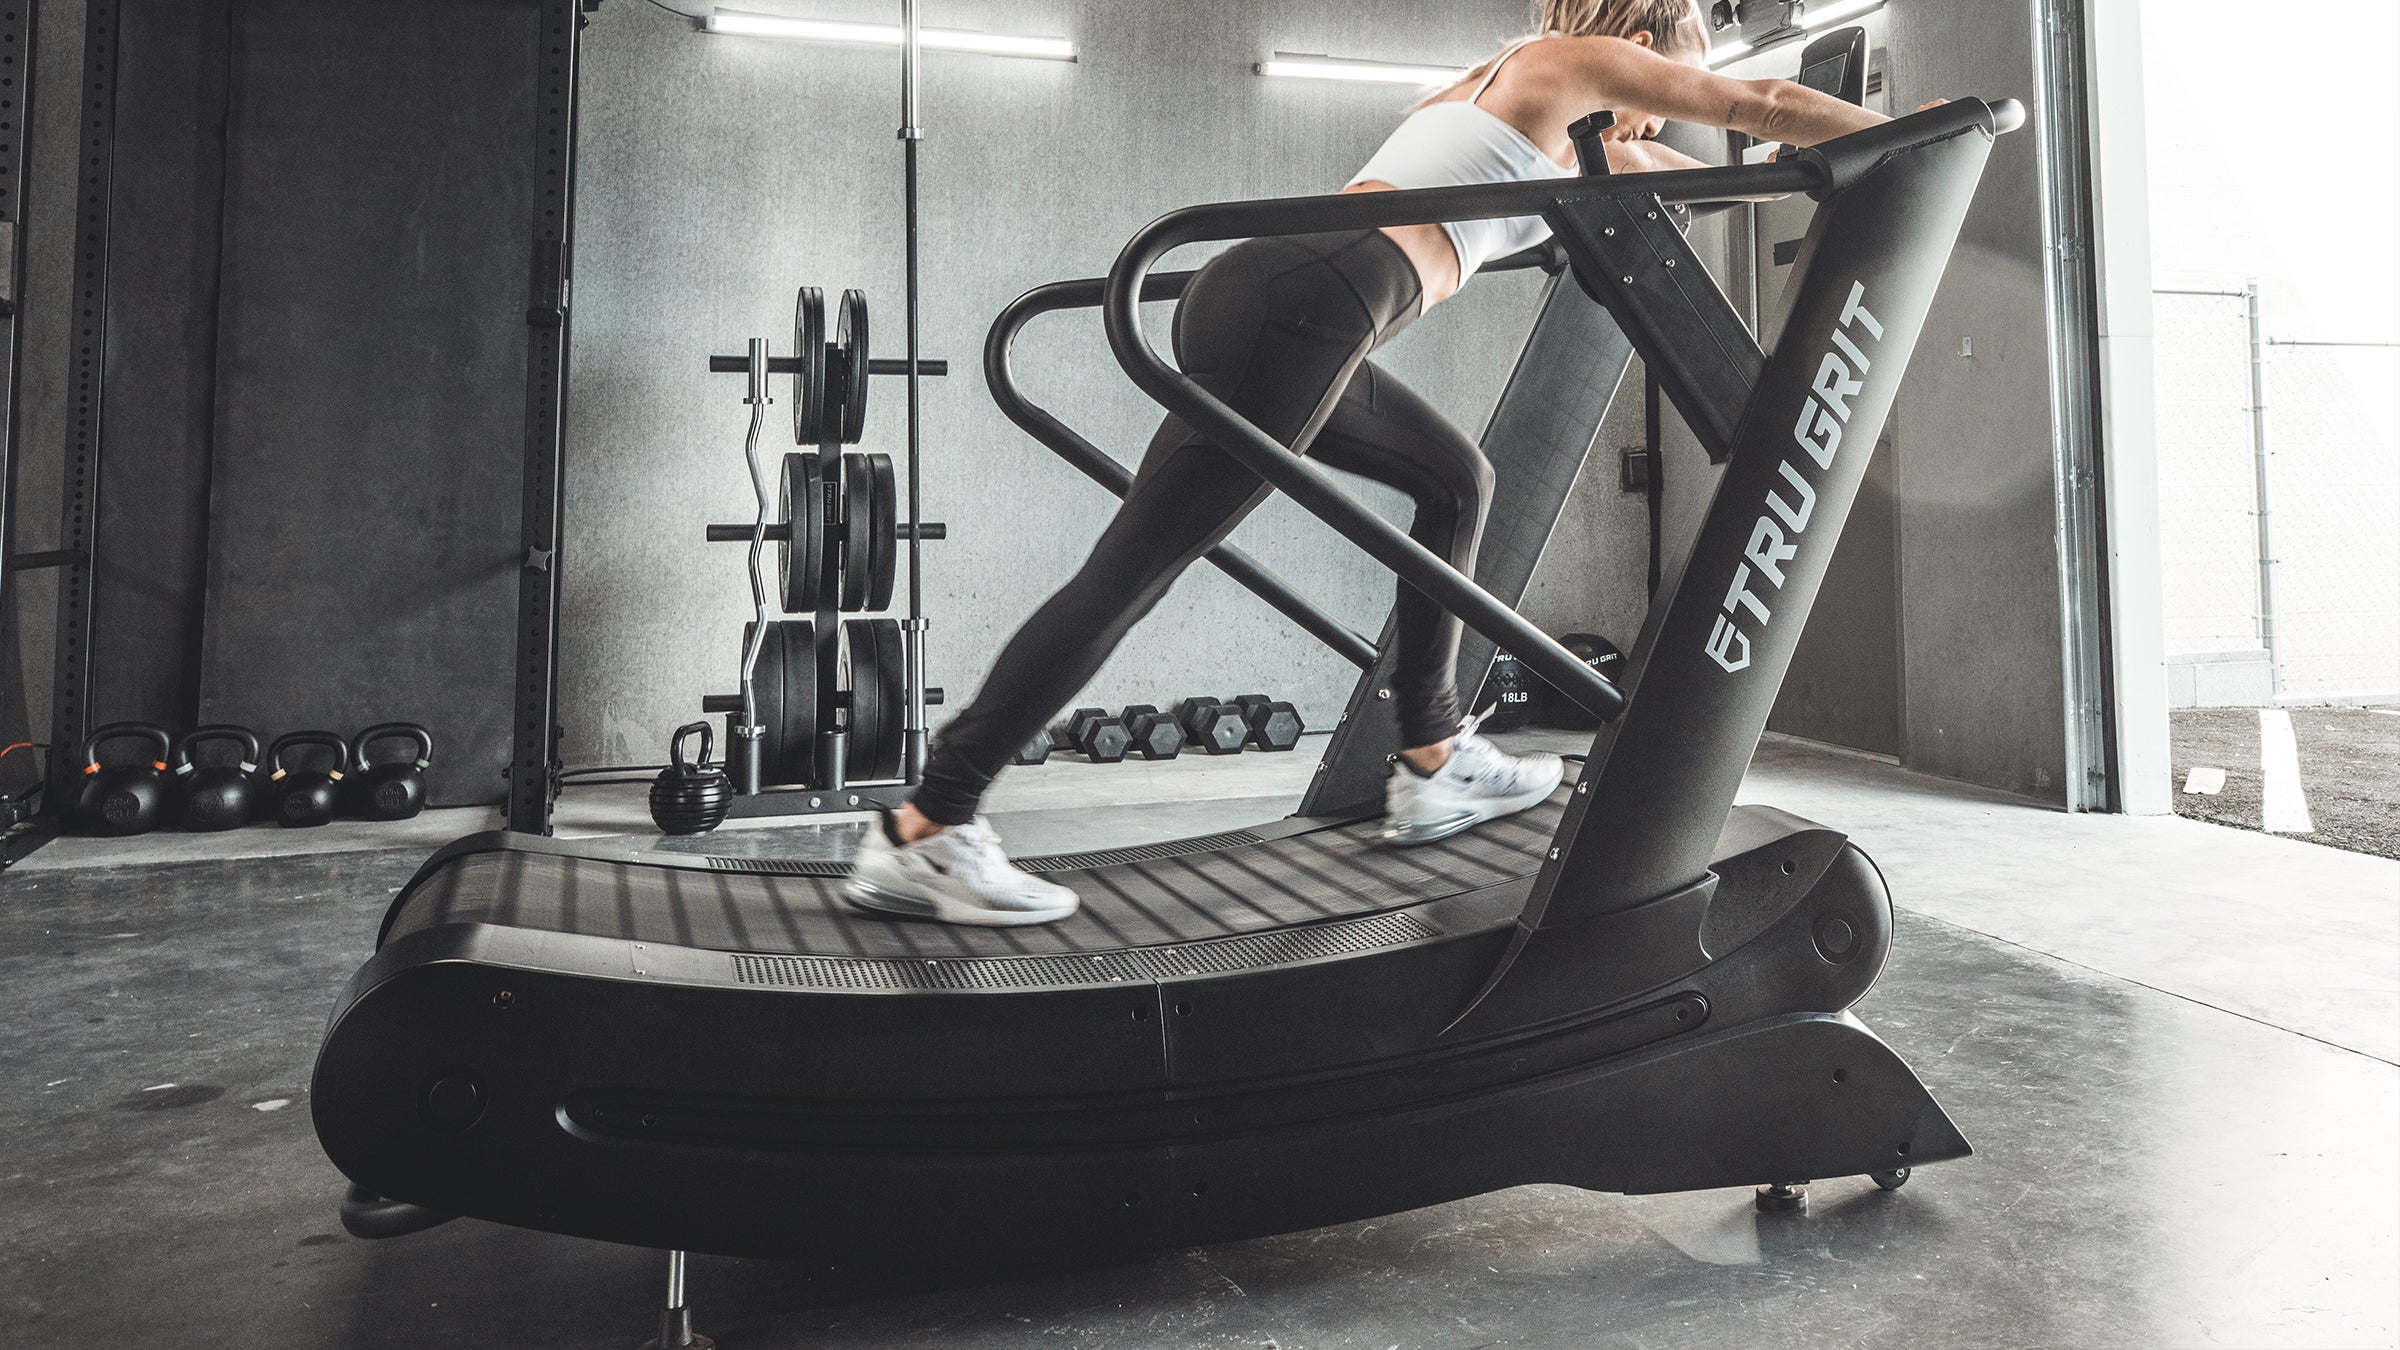 Tri Grit Fitness - Grit Runner. 100% manually operated treadmill you will train harder, break goals faster and crush the competition.